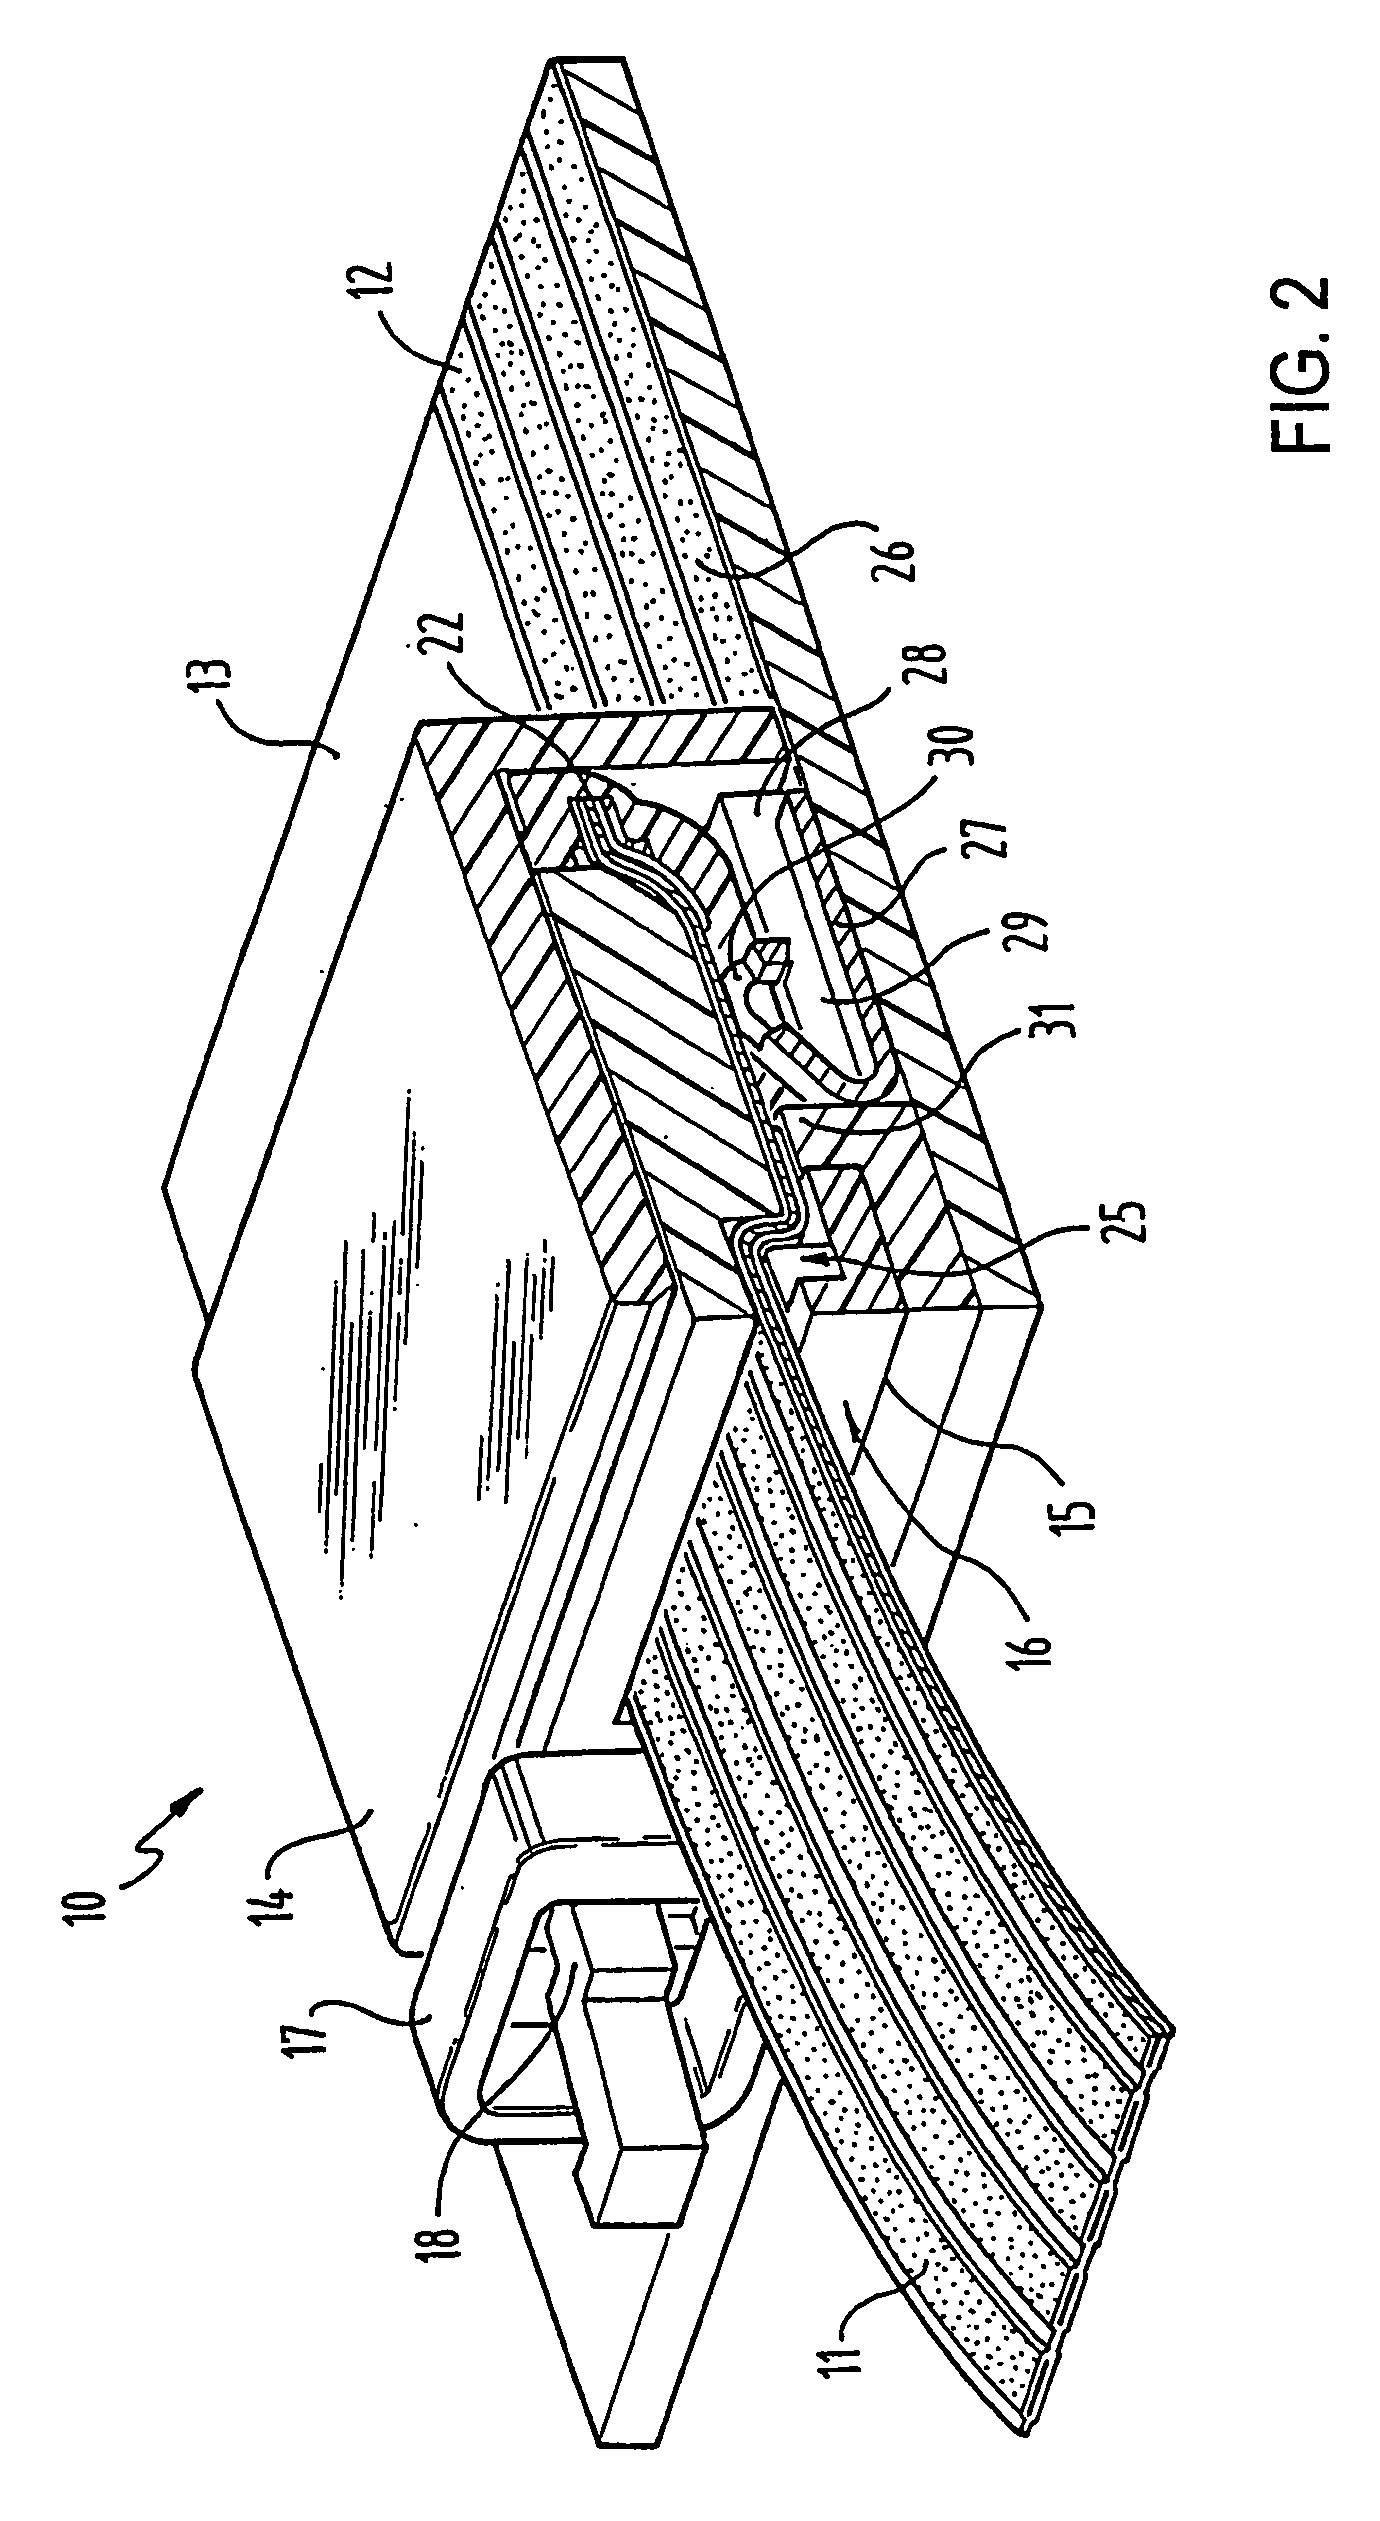 Plug-in connector for connecting two flat strip conductors and associated plug-in connector system